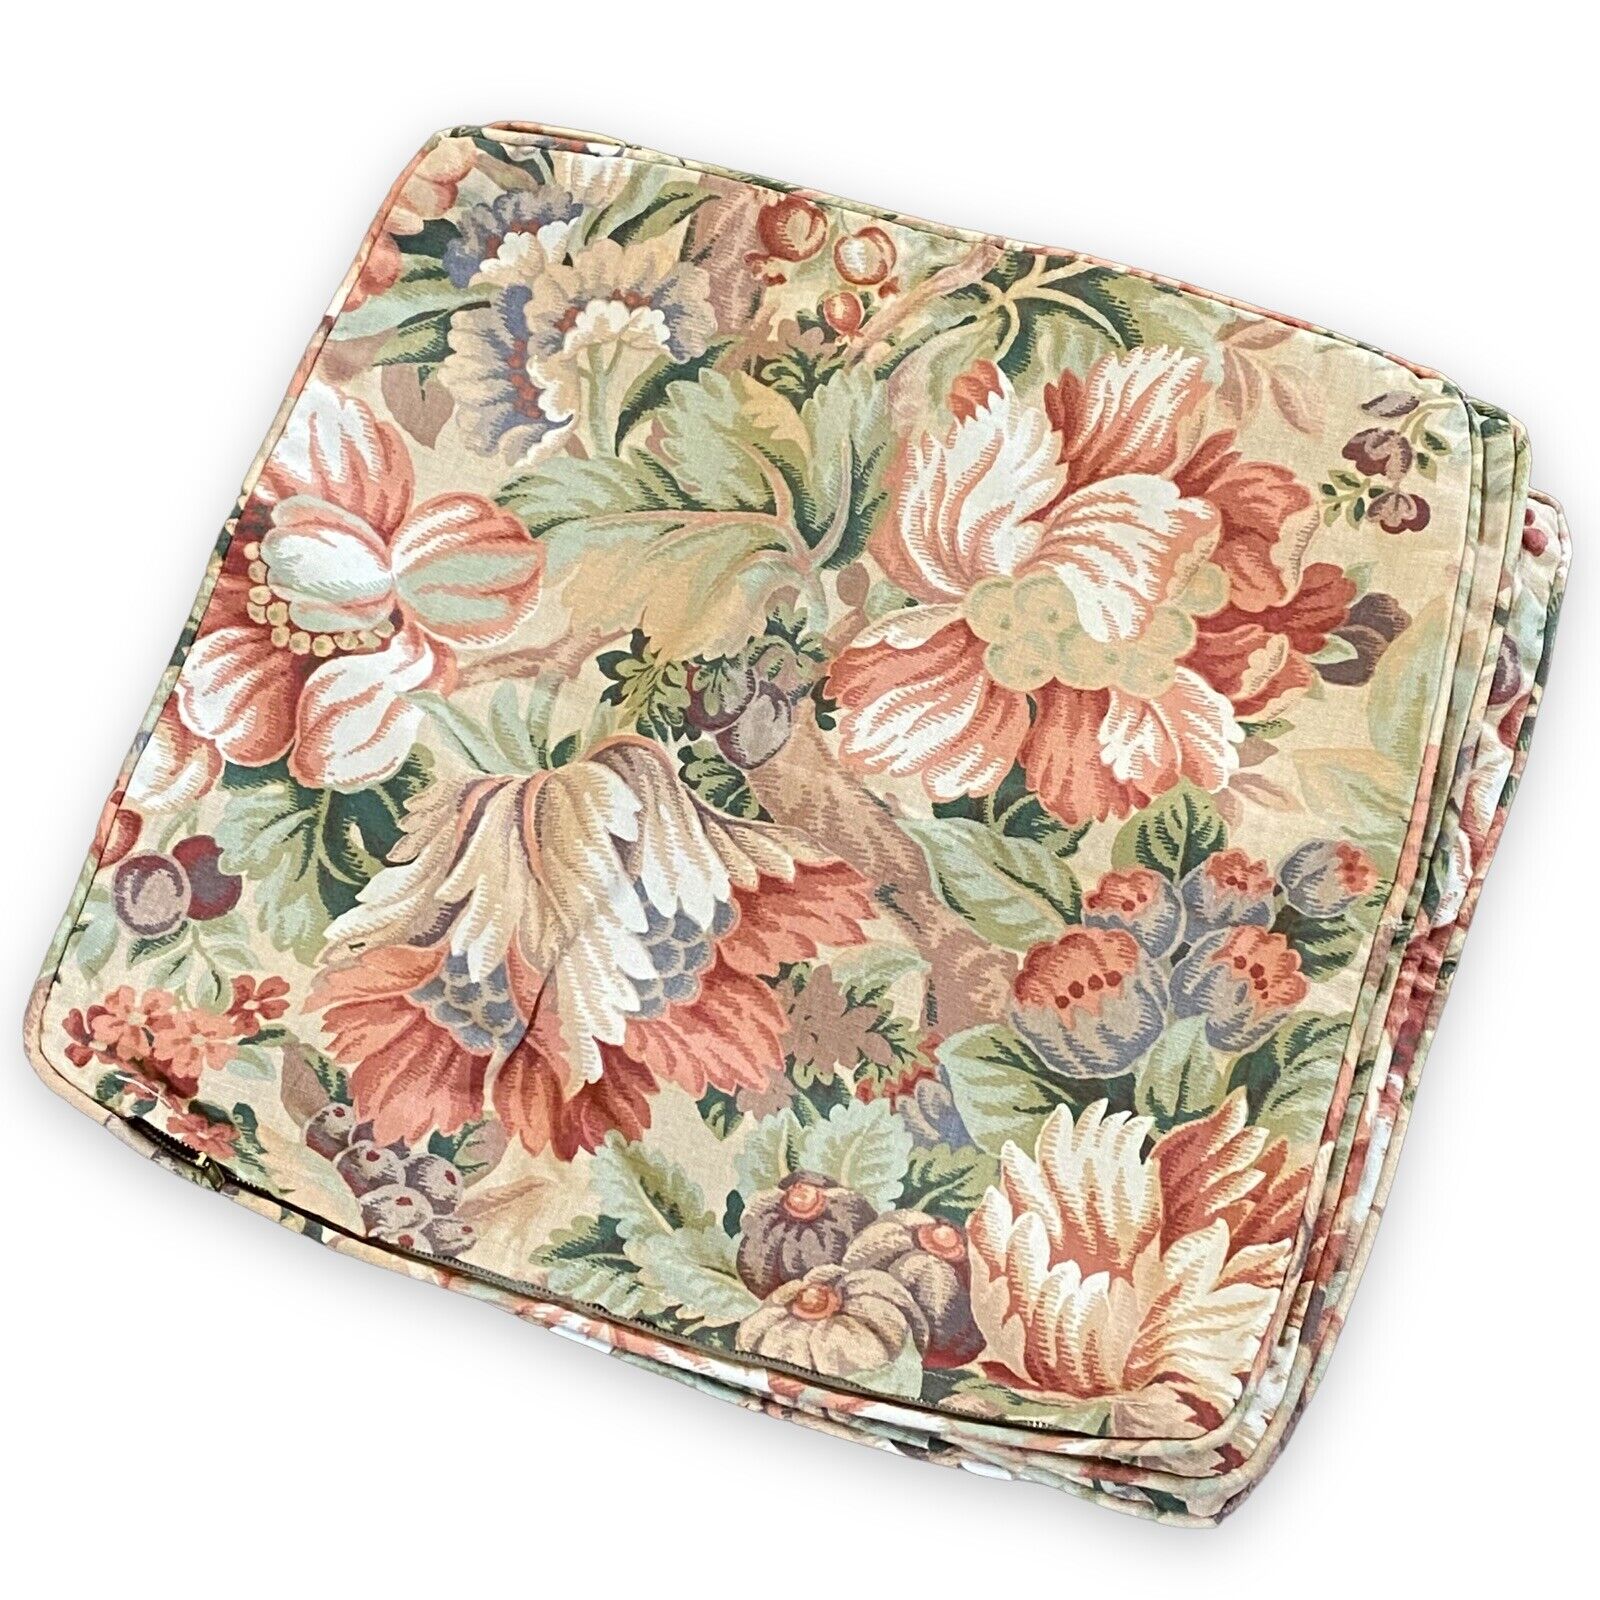 Pink Floral Fabric Pillowcase Pillow Cover 19”x19” Set Of 4 Vintage Cottagecore